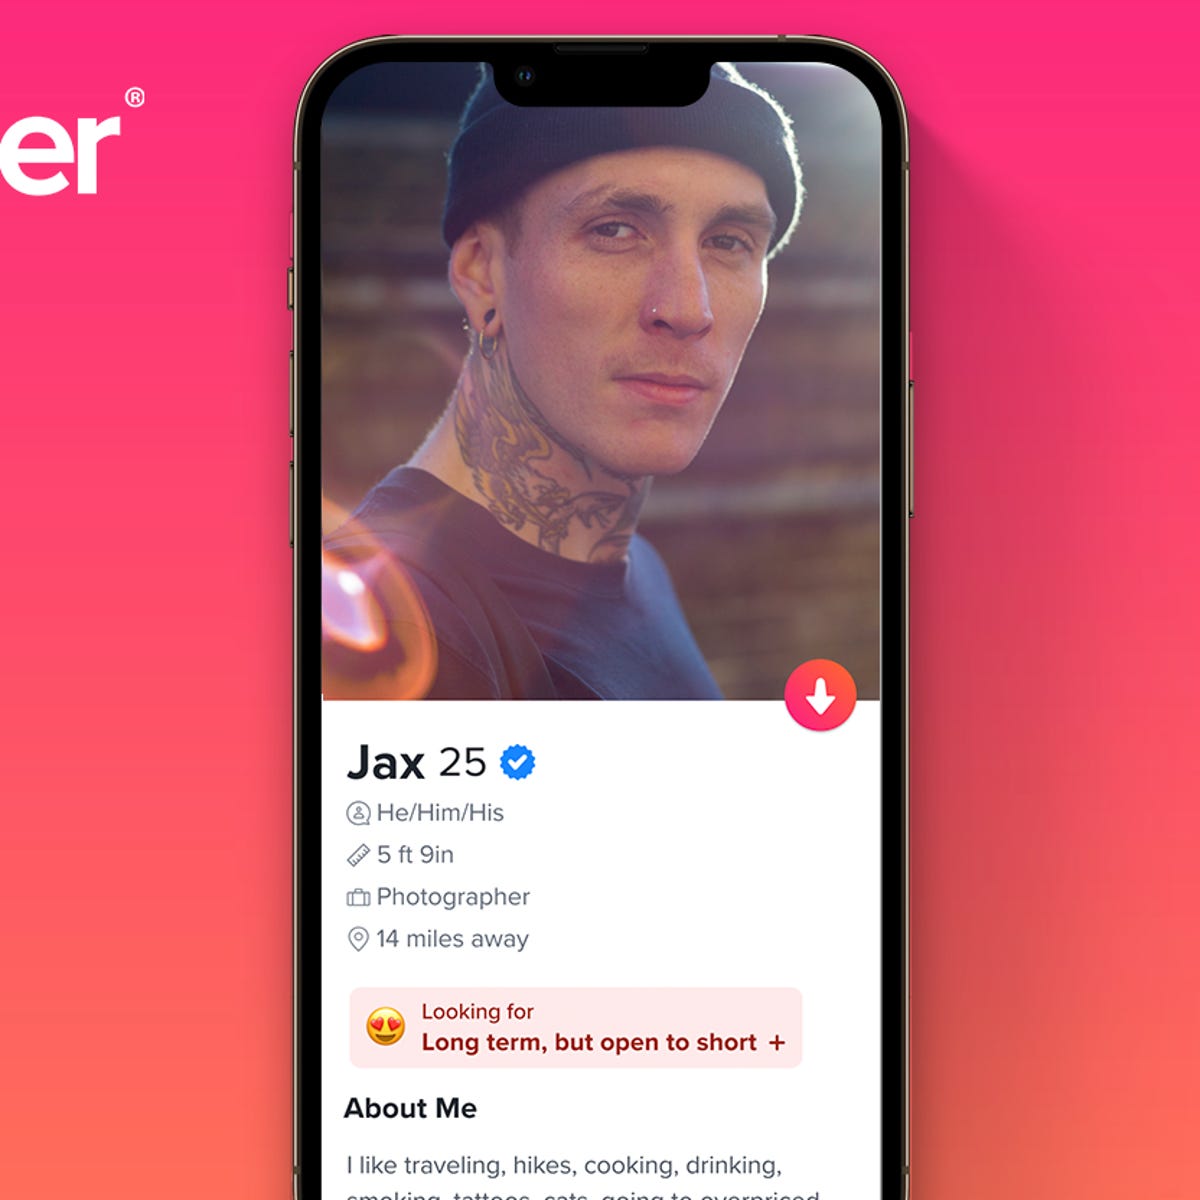 Tinder Promo Code 2022 This New Tinder Feature Could Help You Find a More Compatible Match - CNET